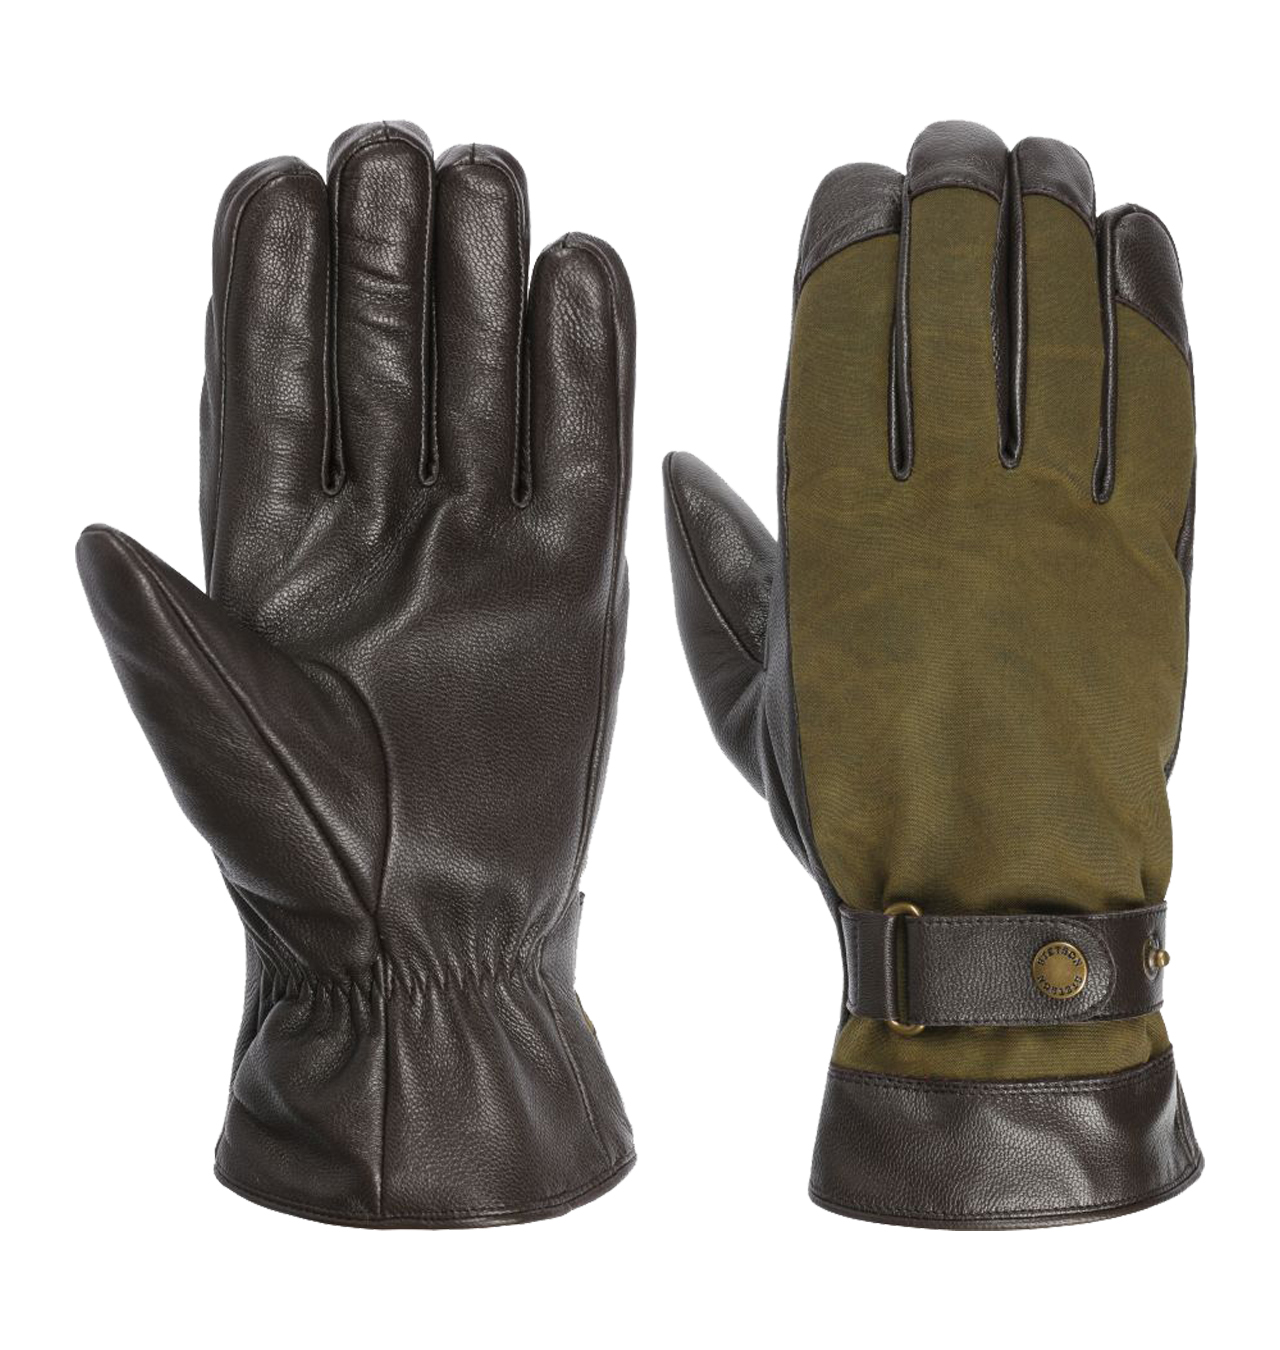 Stetson - Nappa Leather Waxed Cotton Gloves - Olive